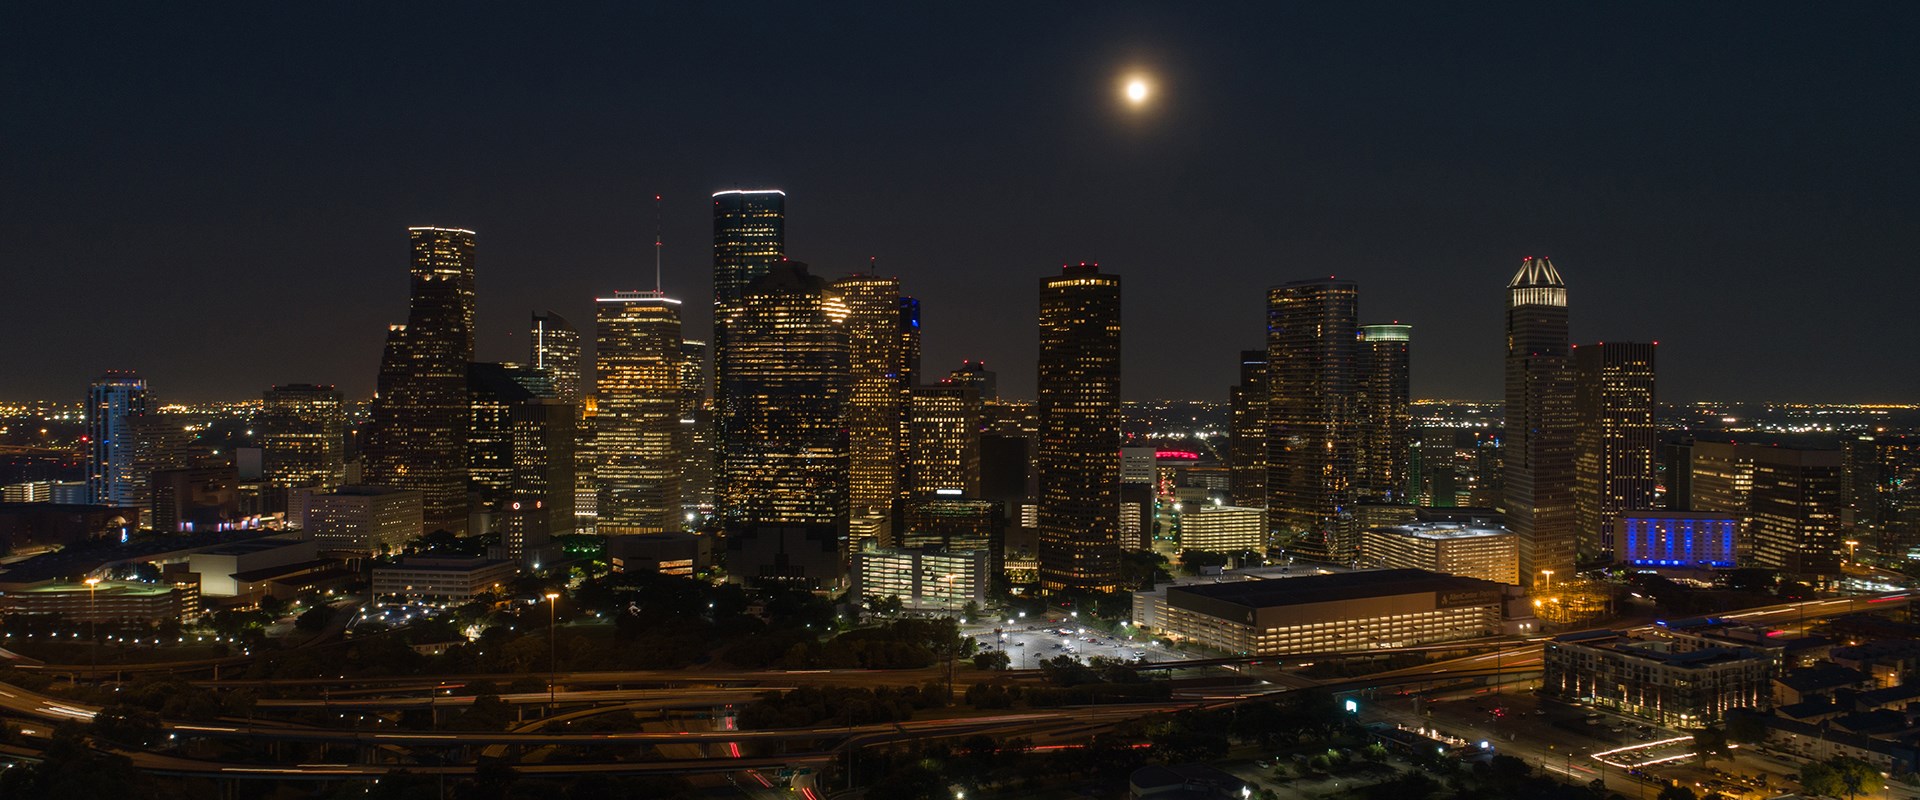 Skyline of Houston Texas at night with skyscrapers in background